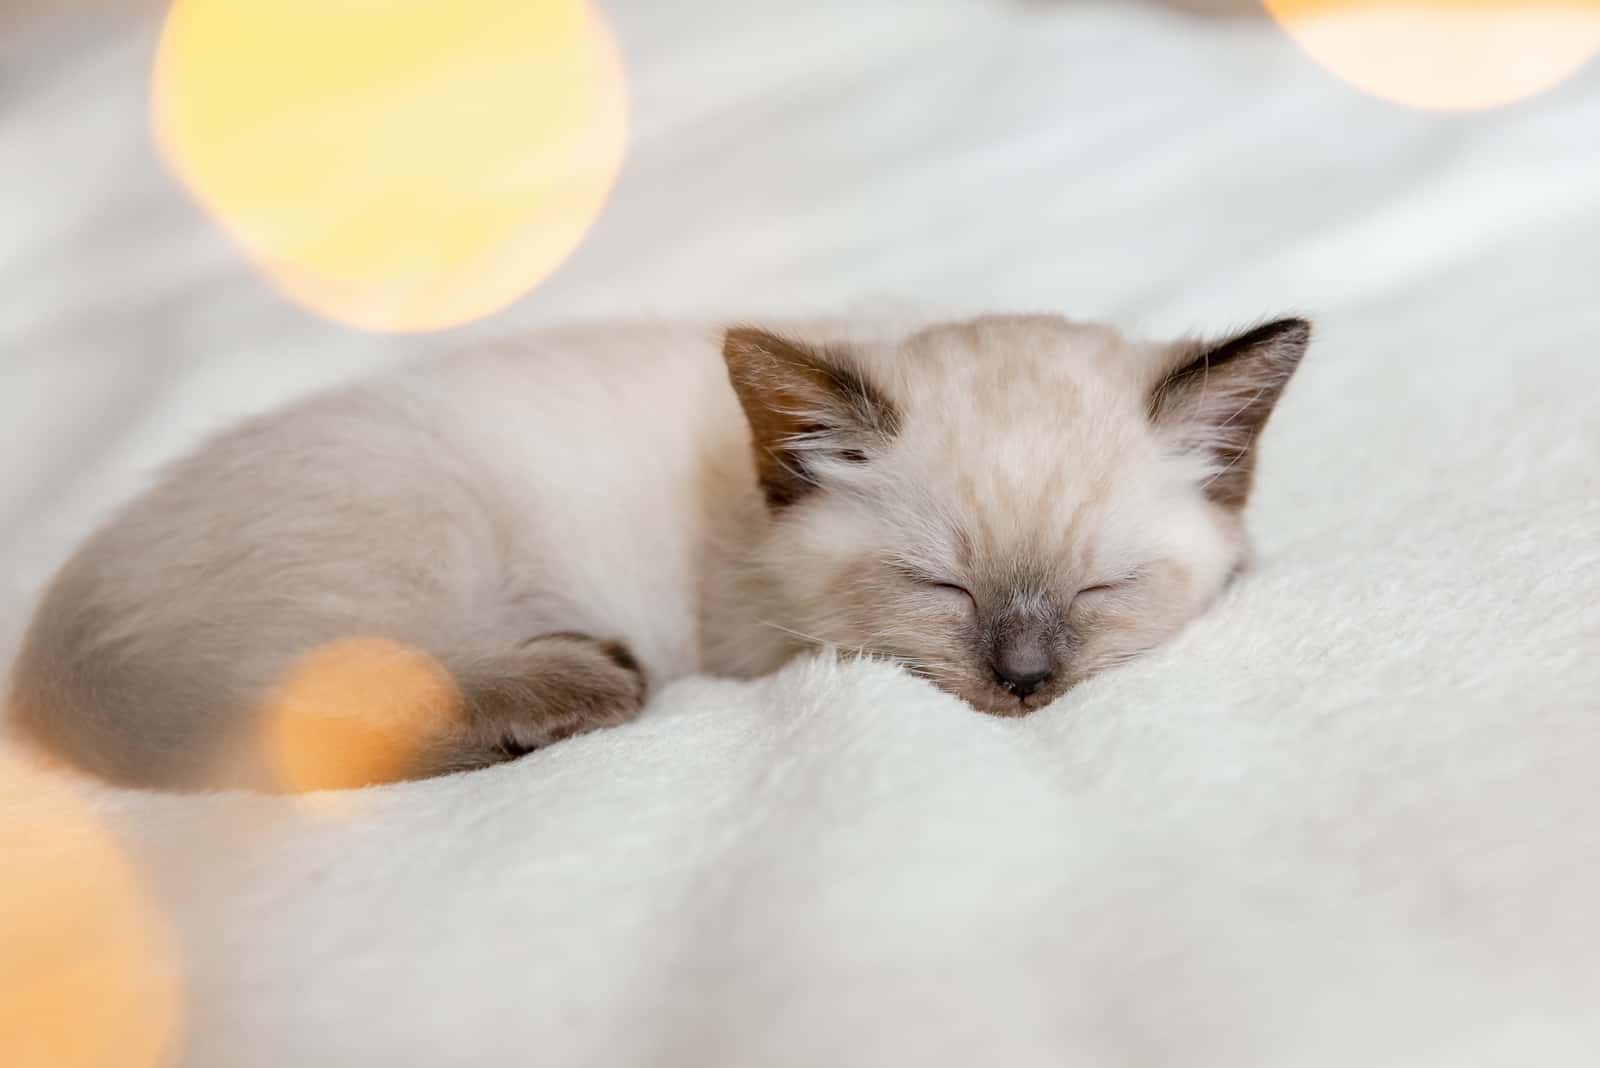 cat sleeping on bed with white sheets